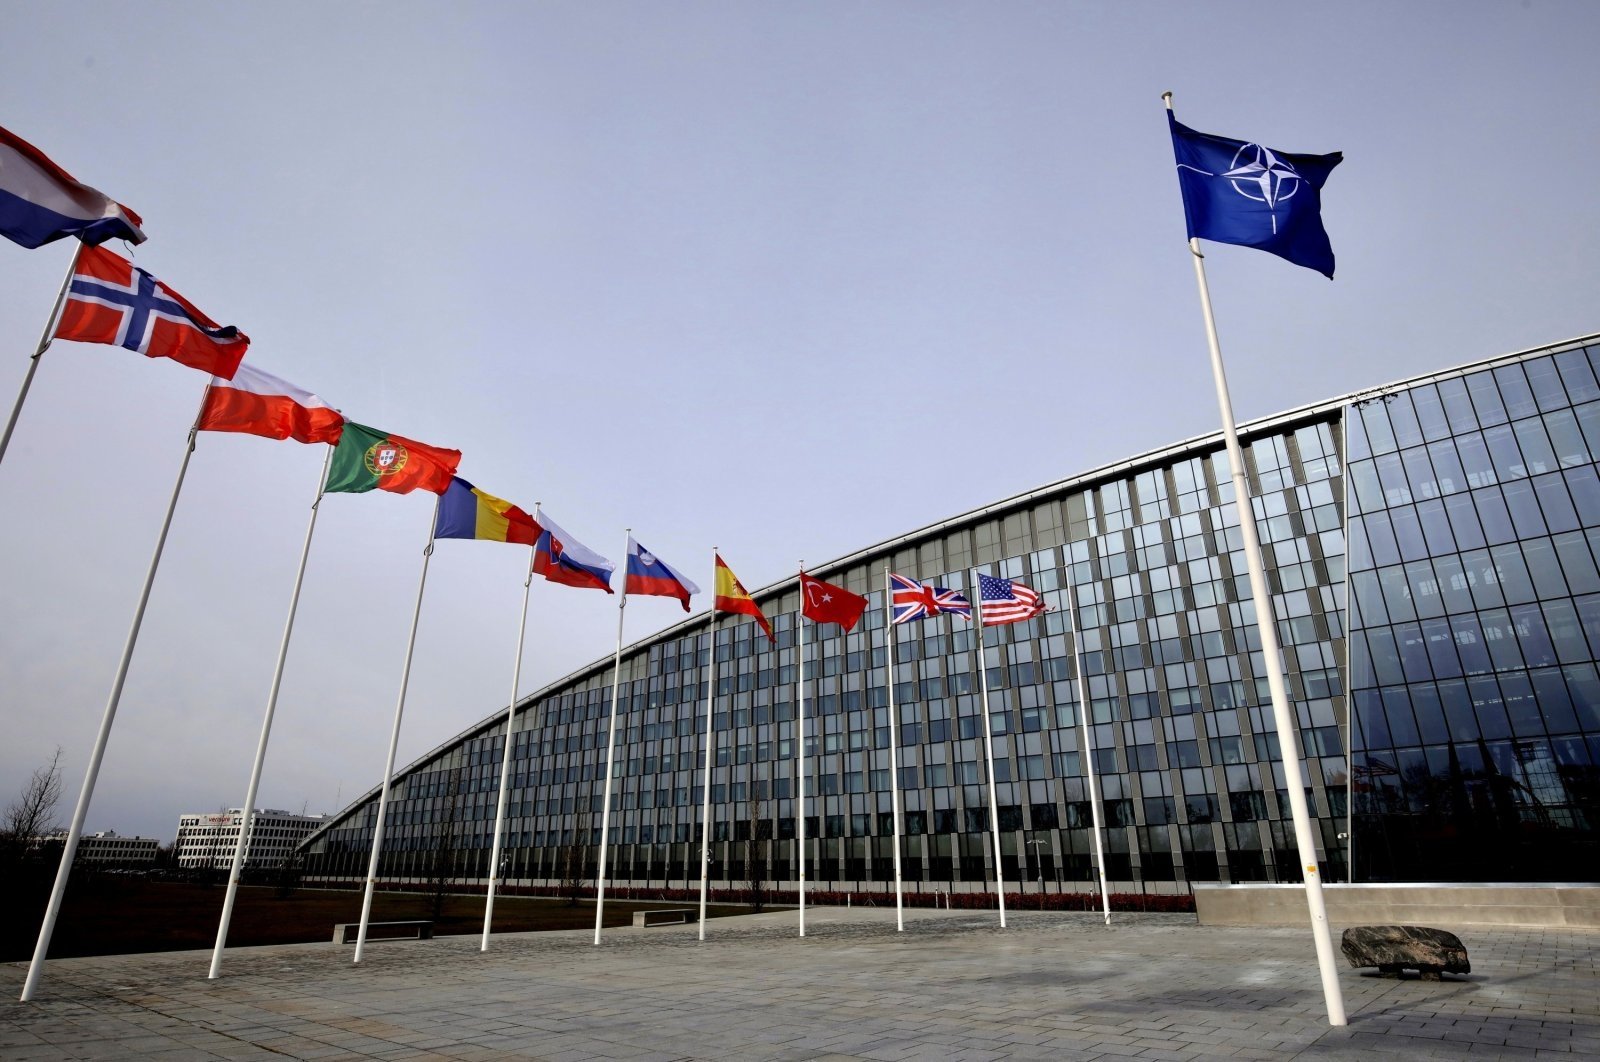 Flags of NATO alliance members flap in the wind outside NATO headquarters in Brussels, Belgium, Feb. 28, 2020. (AP Photo)